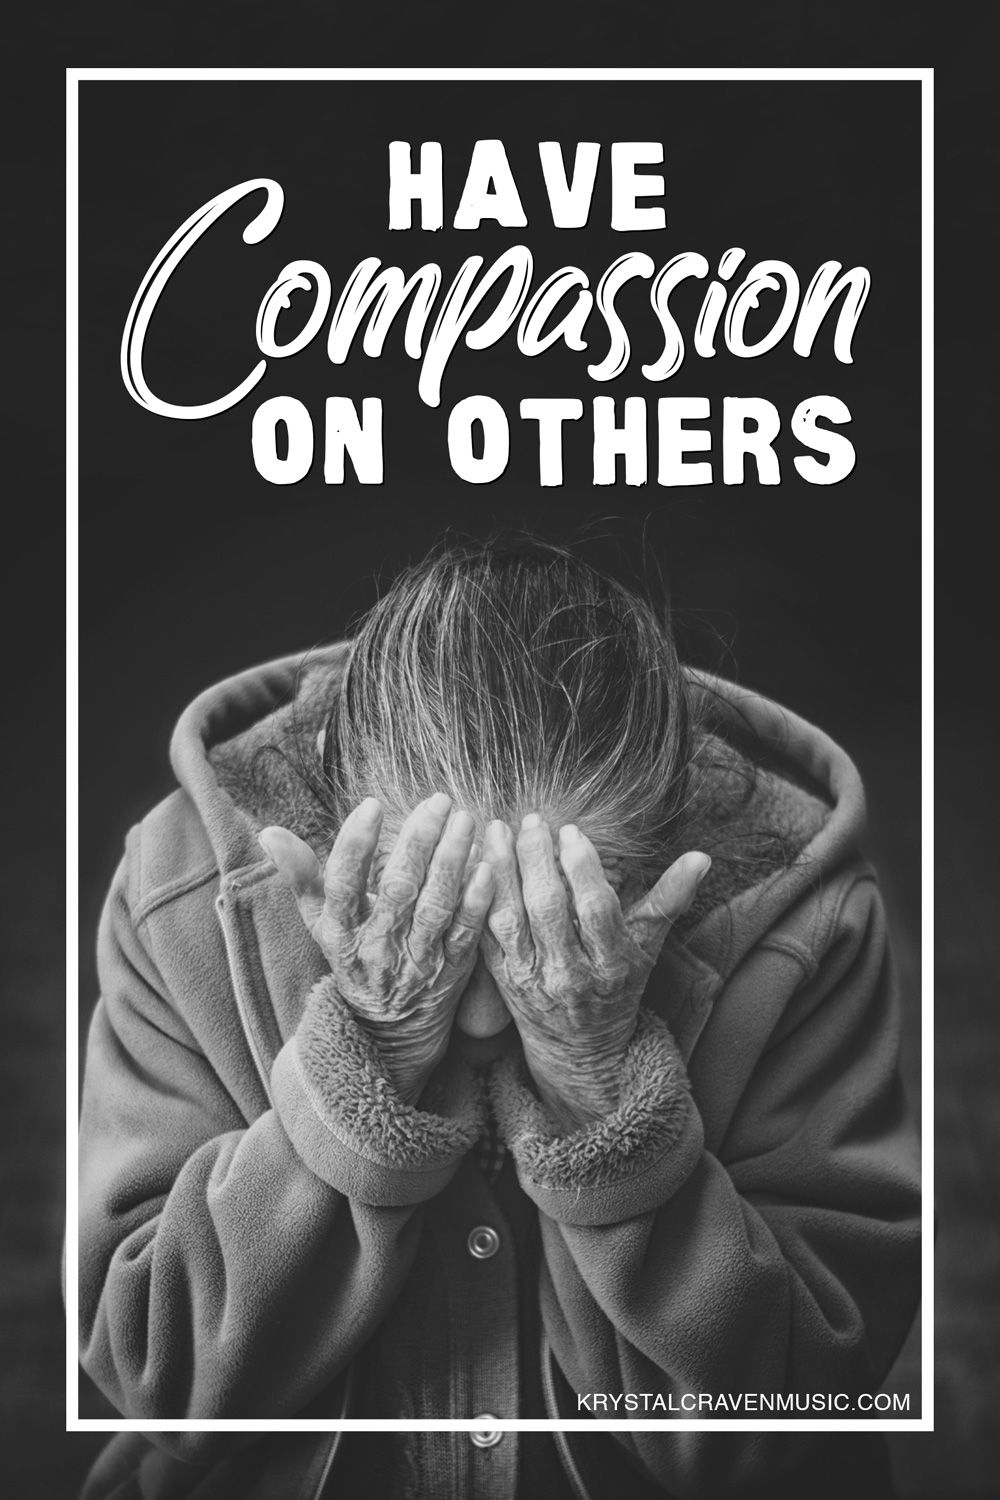 The text of "Have Compassion on Others" overlaying an older woman wearing a coat with her face in her hands, on a black background.